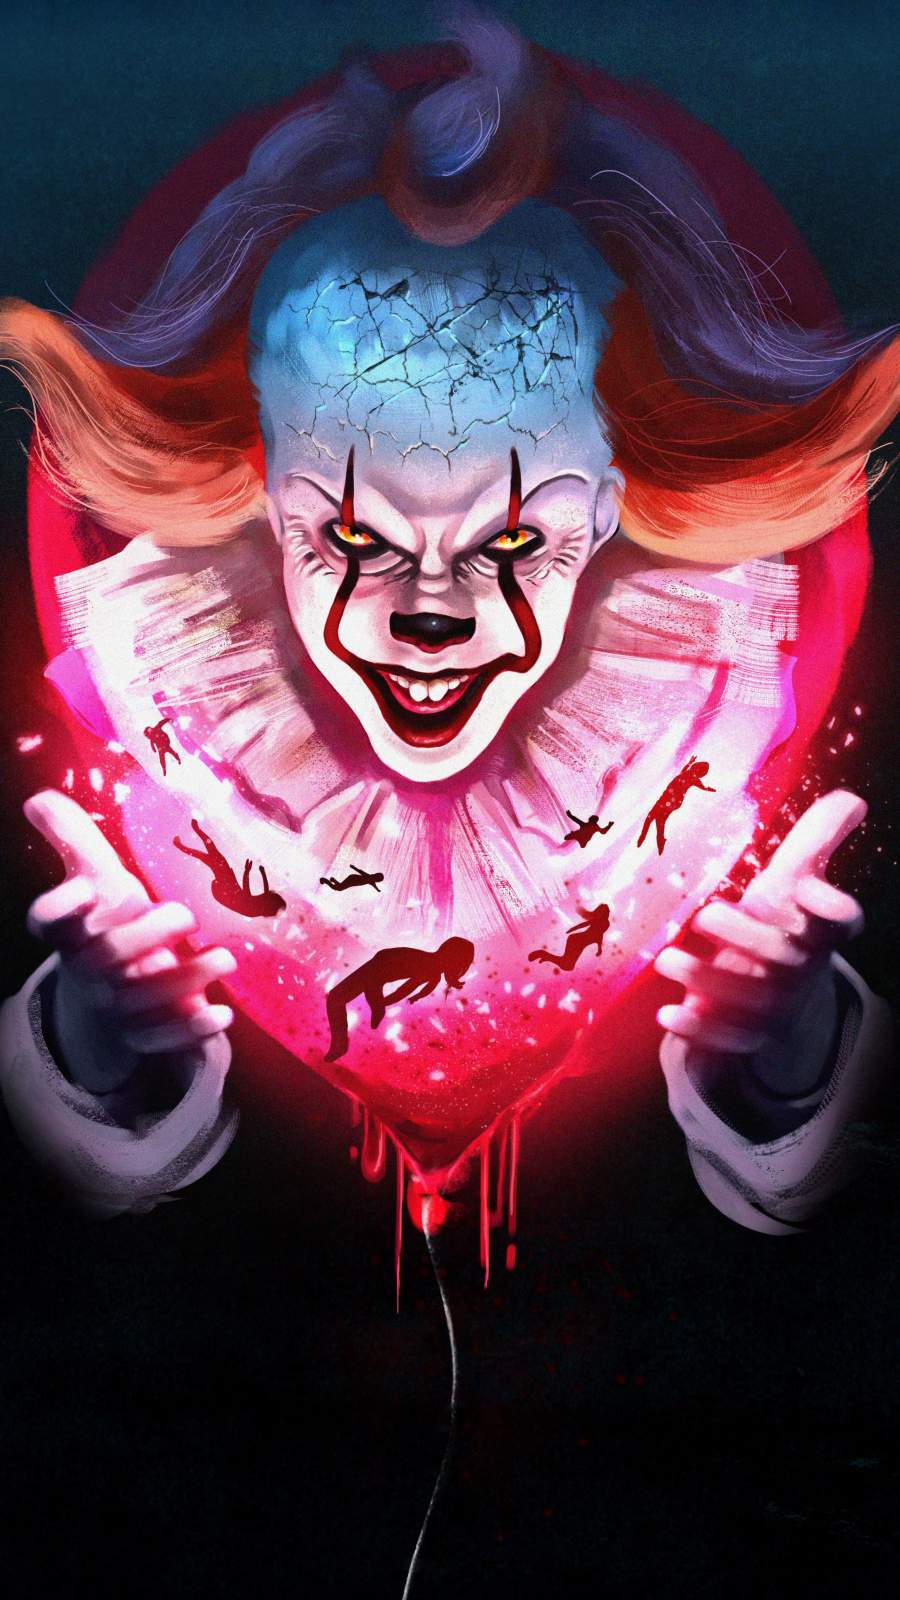 Pennywise Clown - IPhone Wallpapers